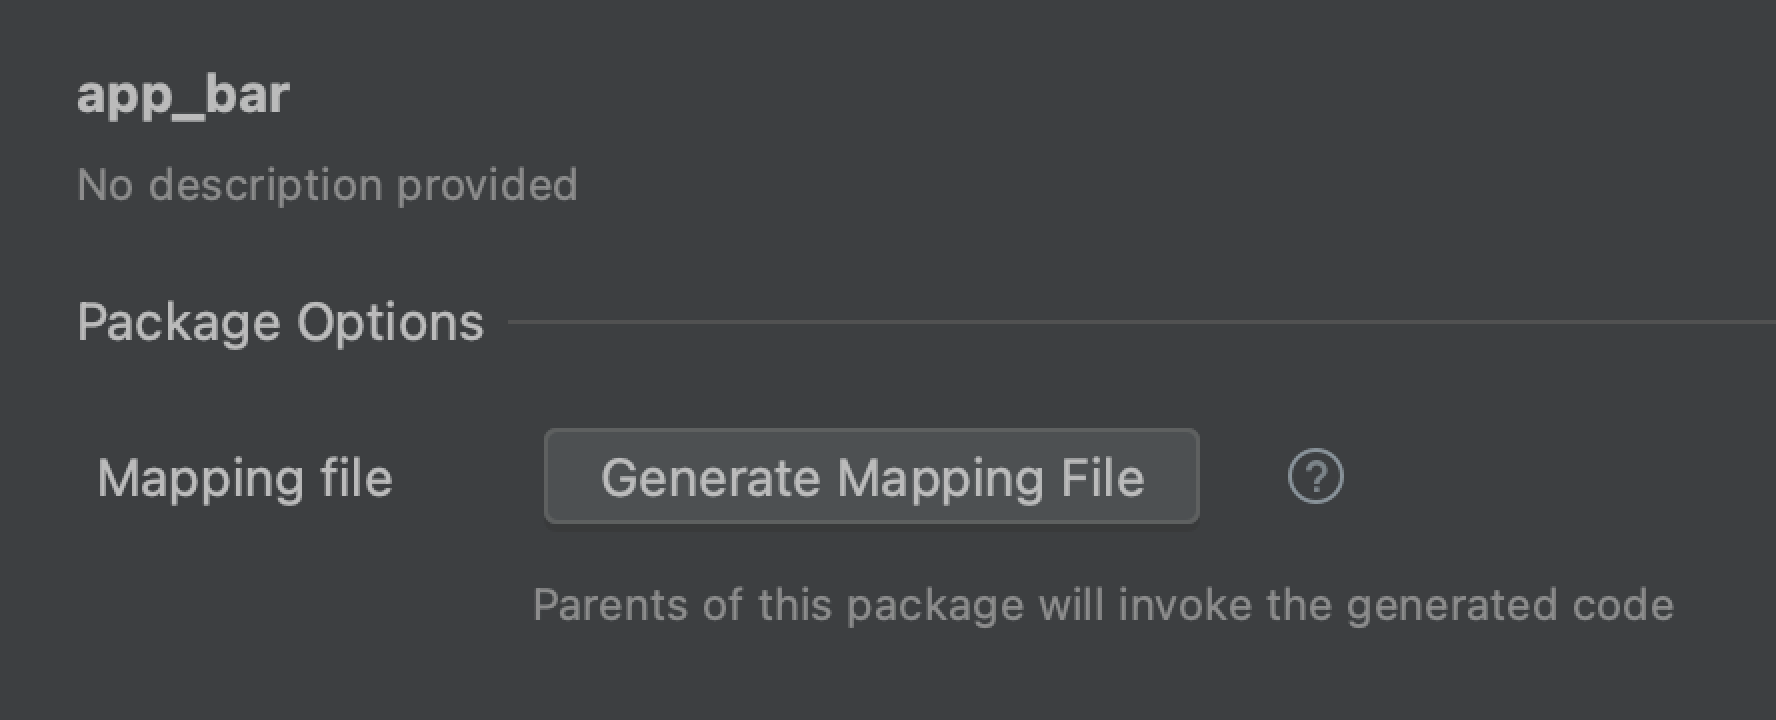 Generate mapping file
affordance